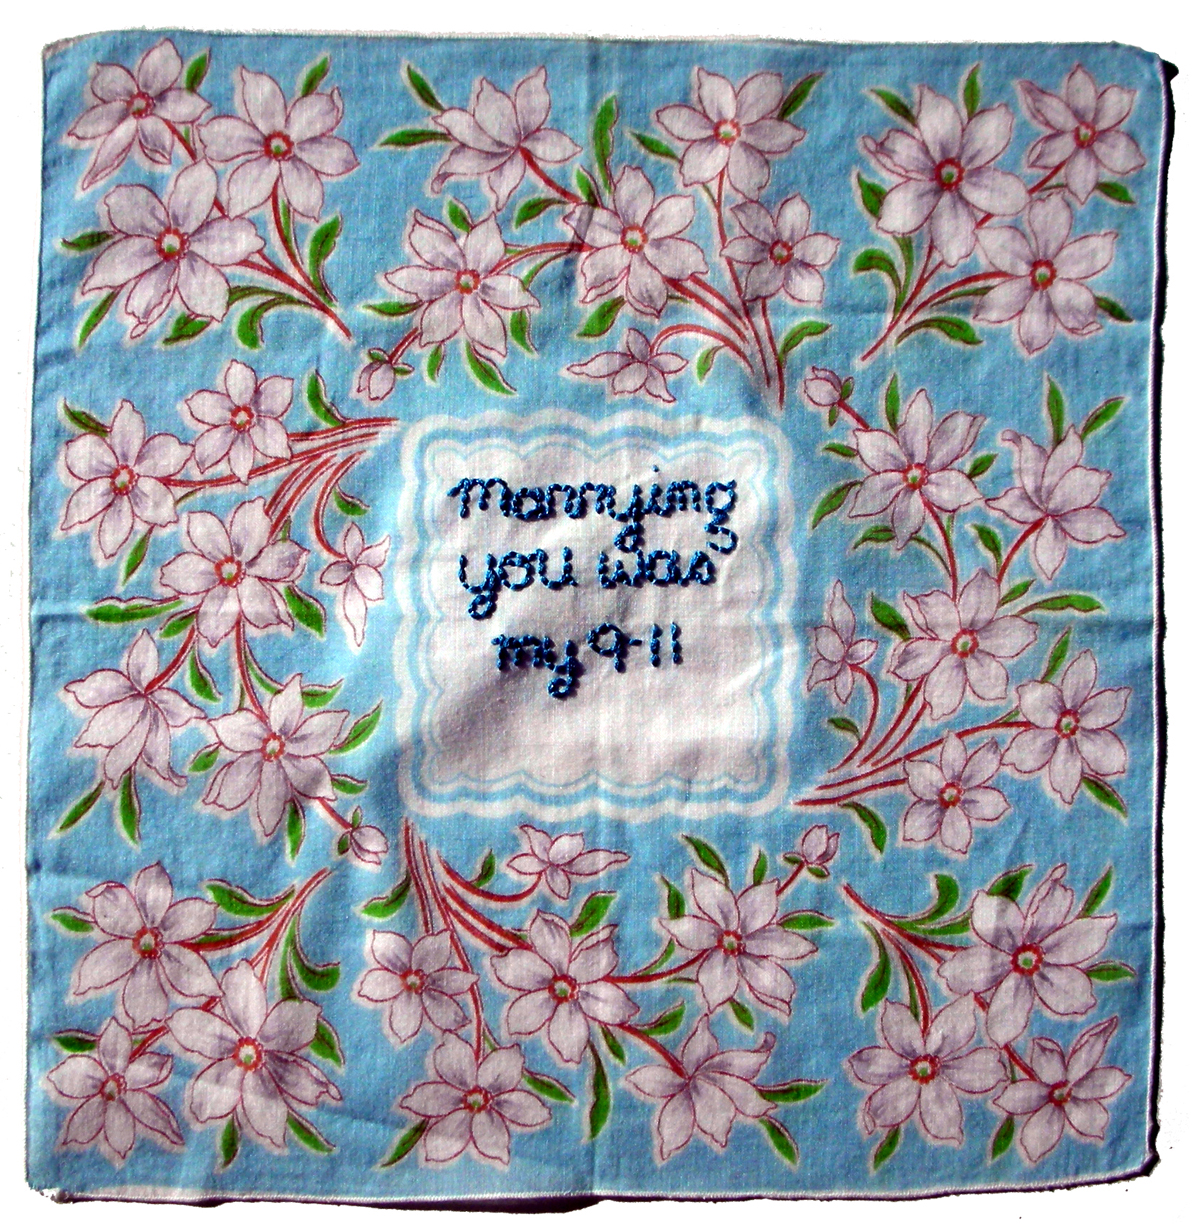 L. Amelia Raley, Marrying you was my 9-11: Vintage handkerchiefs with embroidered phrases spoken by guests of a popular daytime psychiatric television show; 12” x 12” (2007)